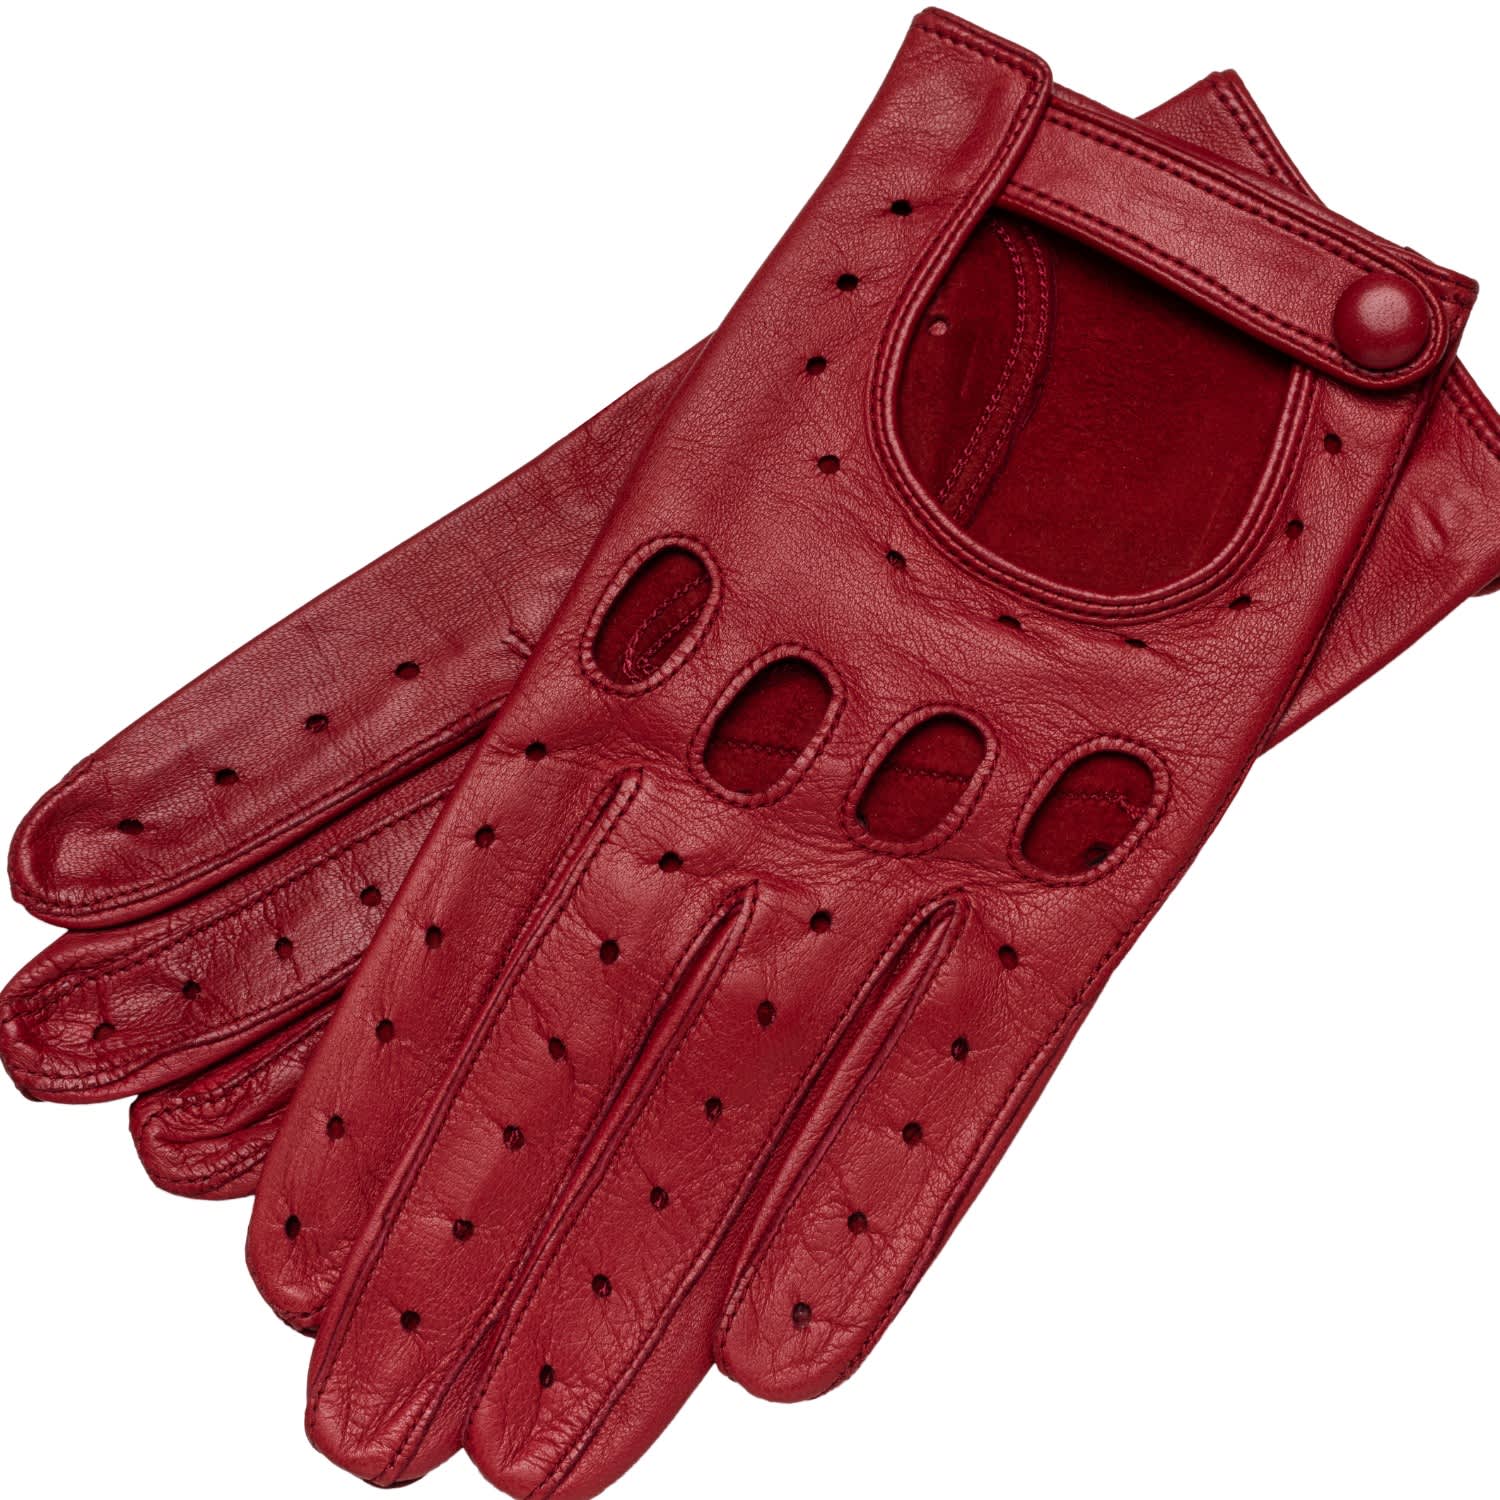 Womens Driving Gloves Faux Leather Maroon Color NIP